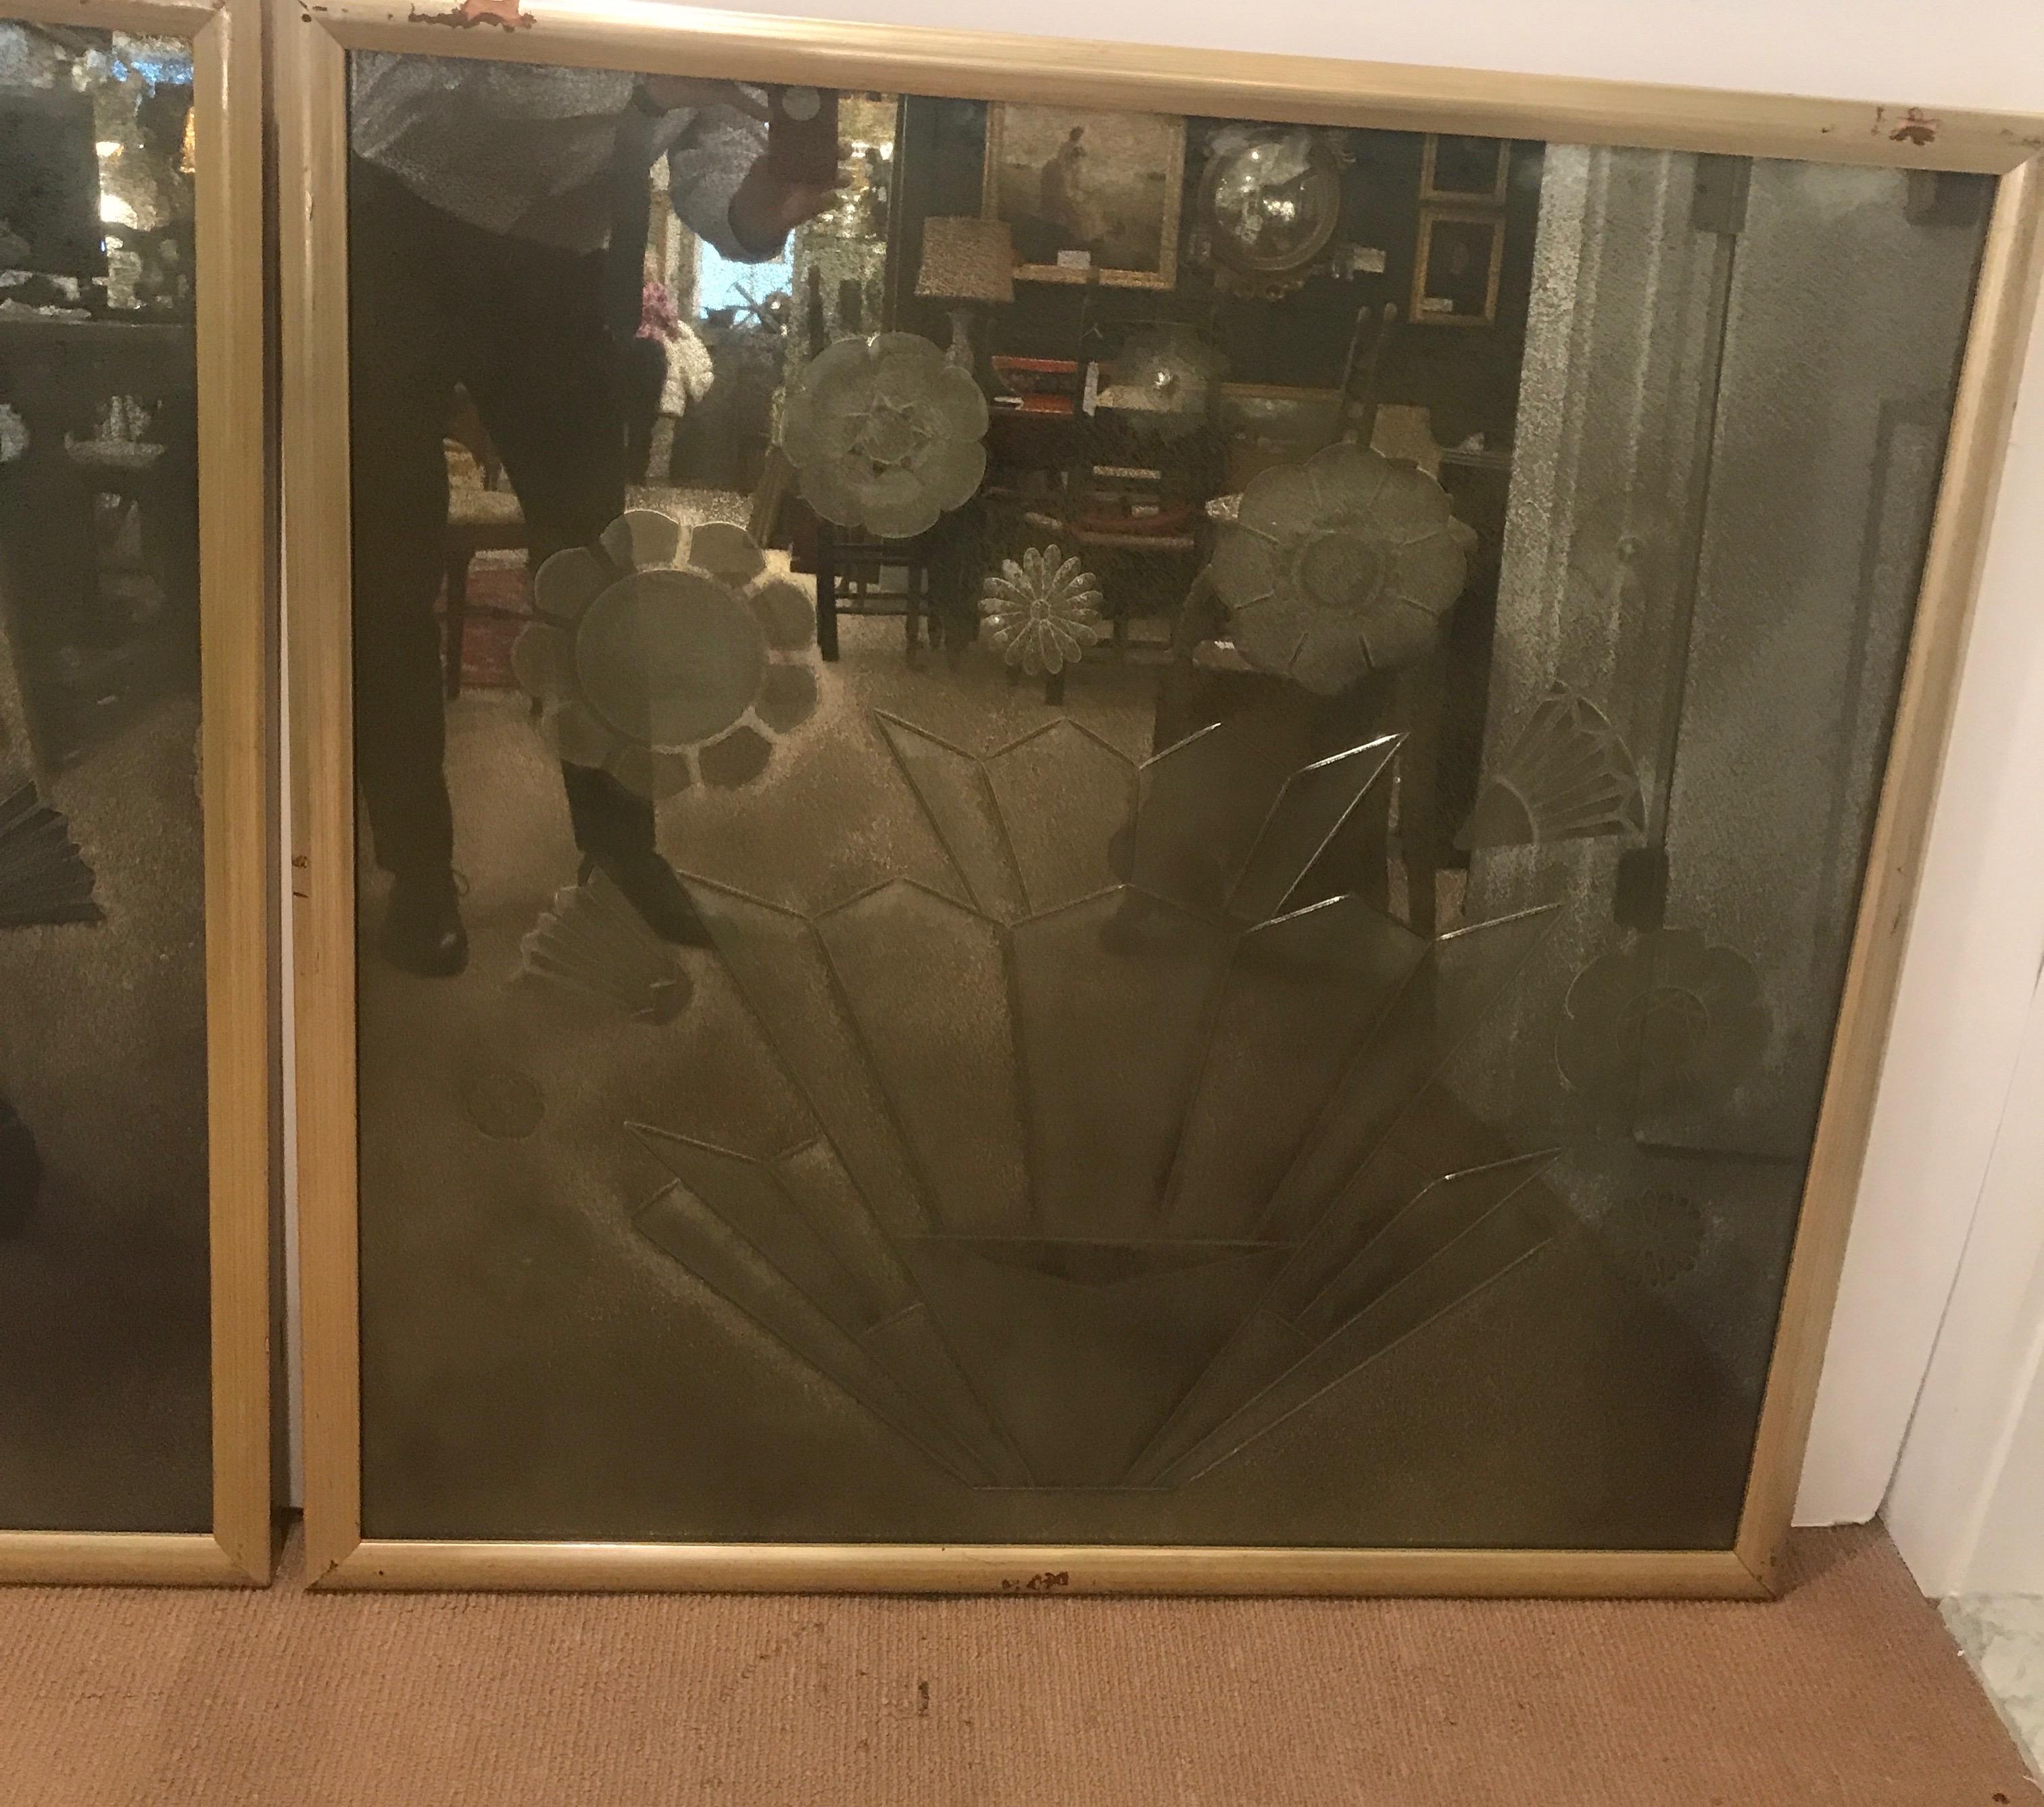 American Pair of Engraved Art Deco Mirrors, 1920s from the Waldorf Astoria